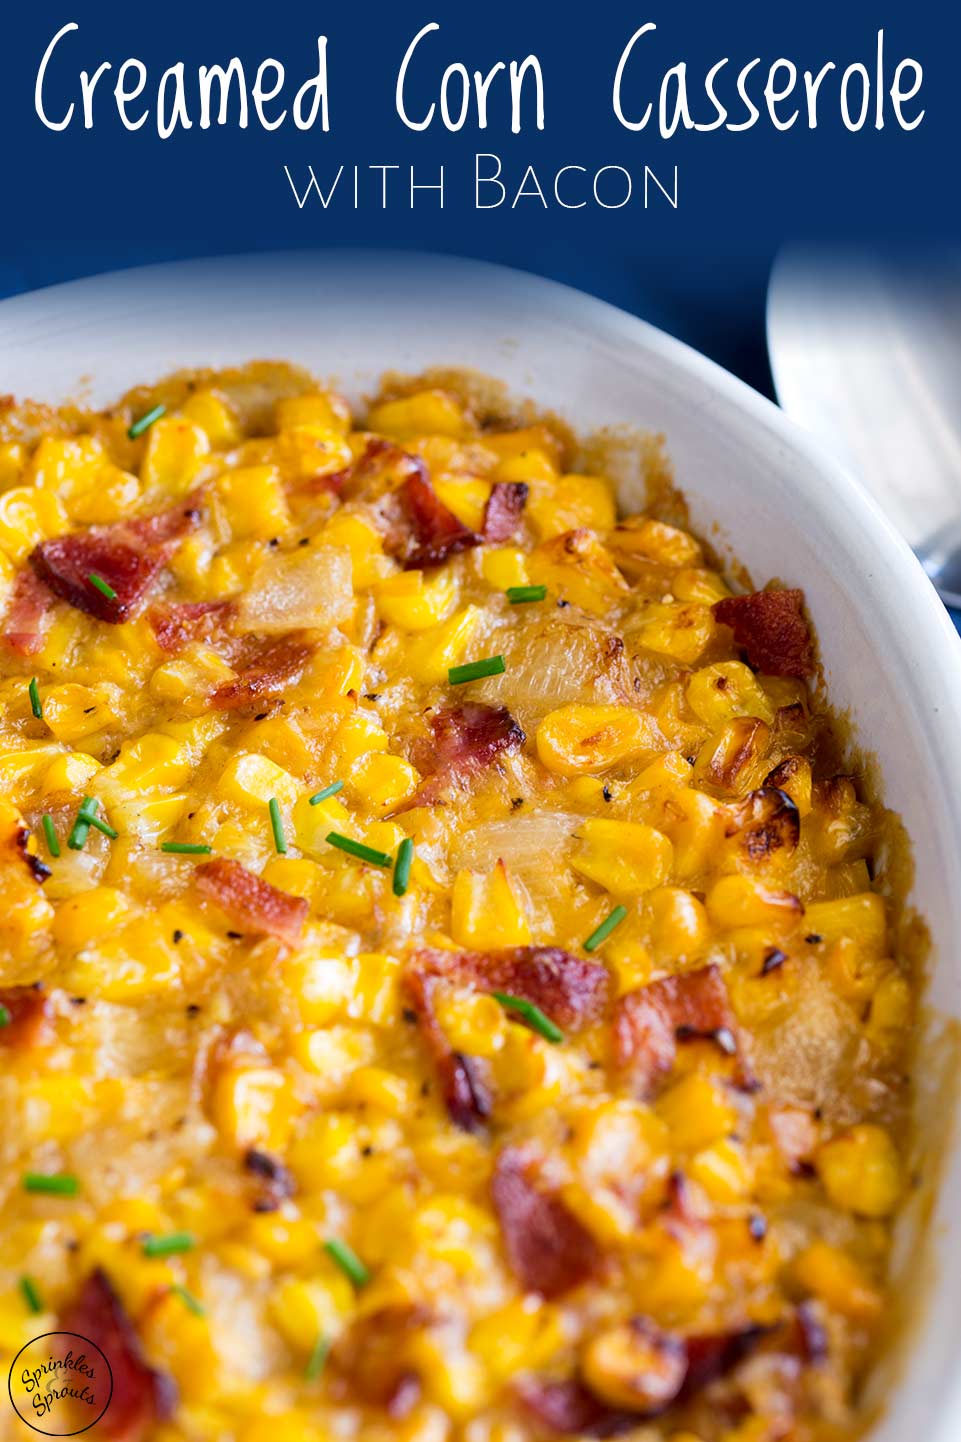 clos cup of the crust of the creamed corn casserole with writing at the top